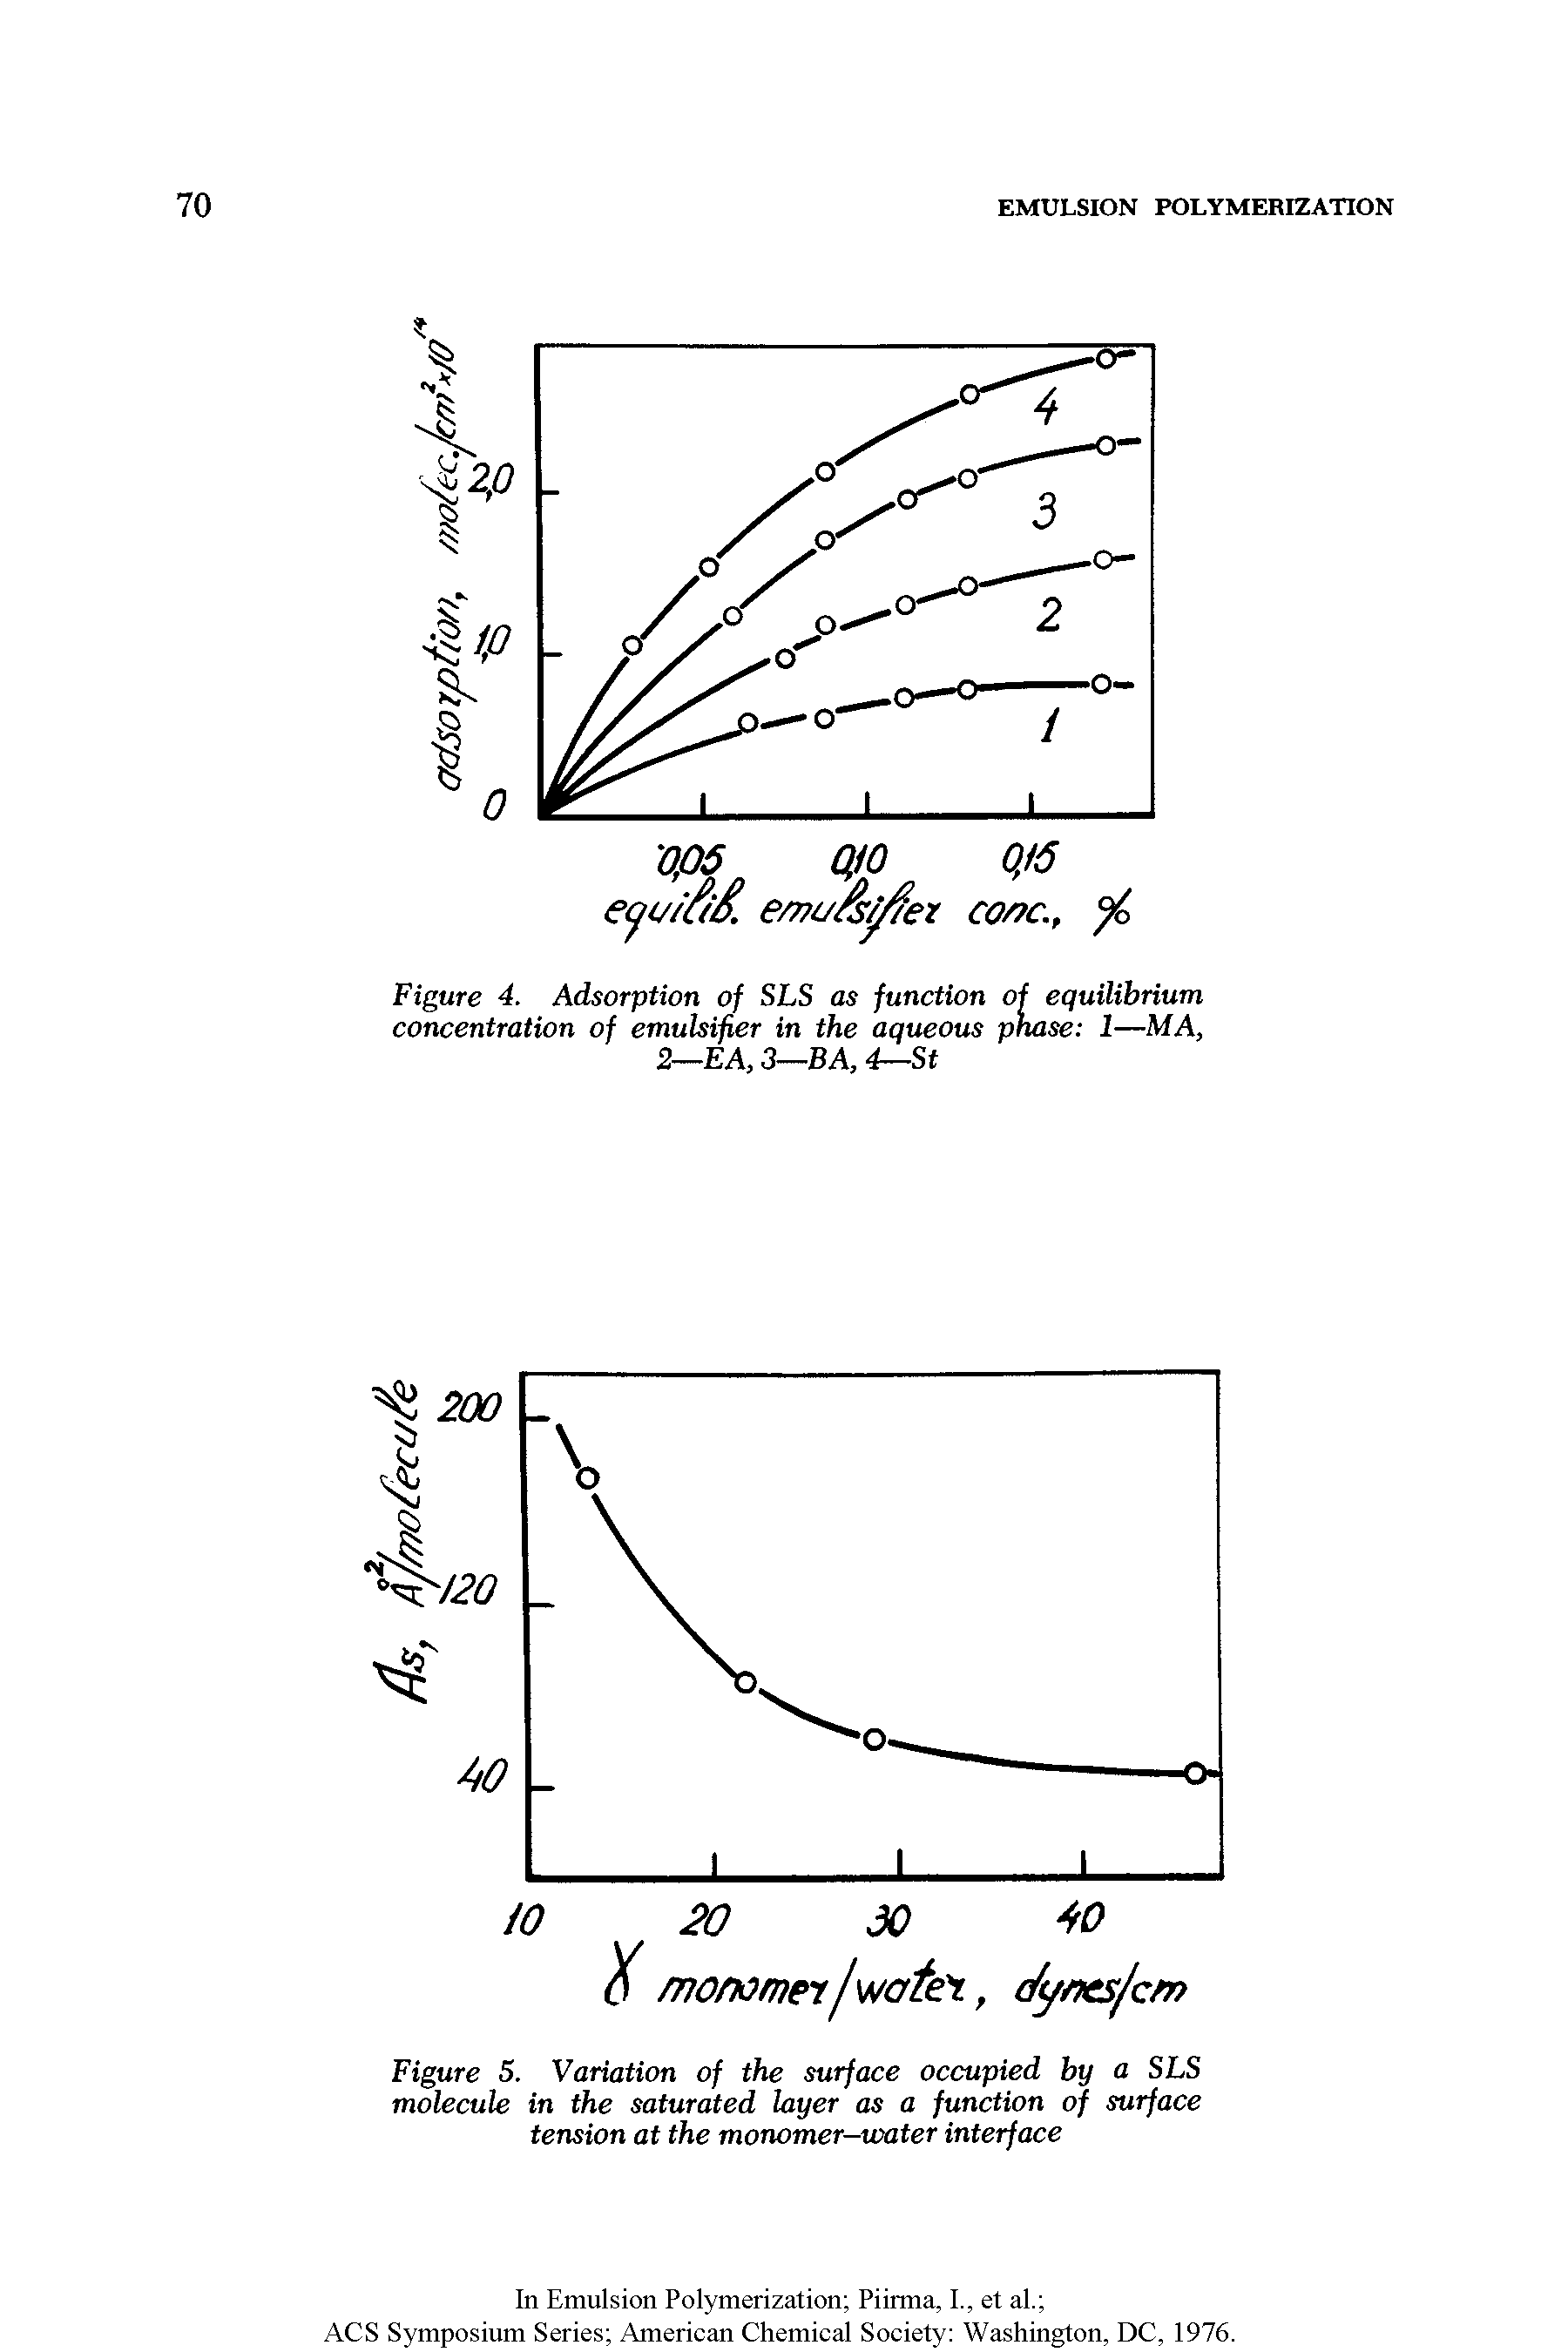 Figure 4. Adsorption of SLS as function of equilibrium concentration of emulsifier in the aqueous phase 1—MA, 2—EA, 3—BA, 4—St...